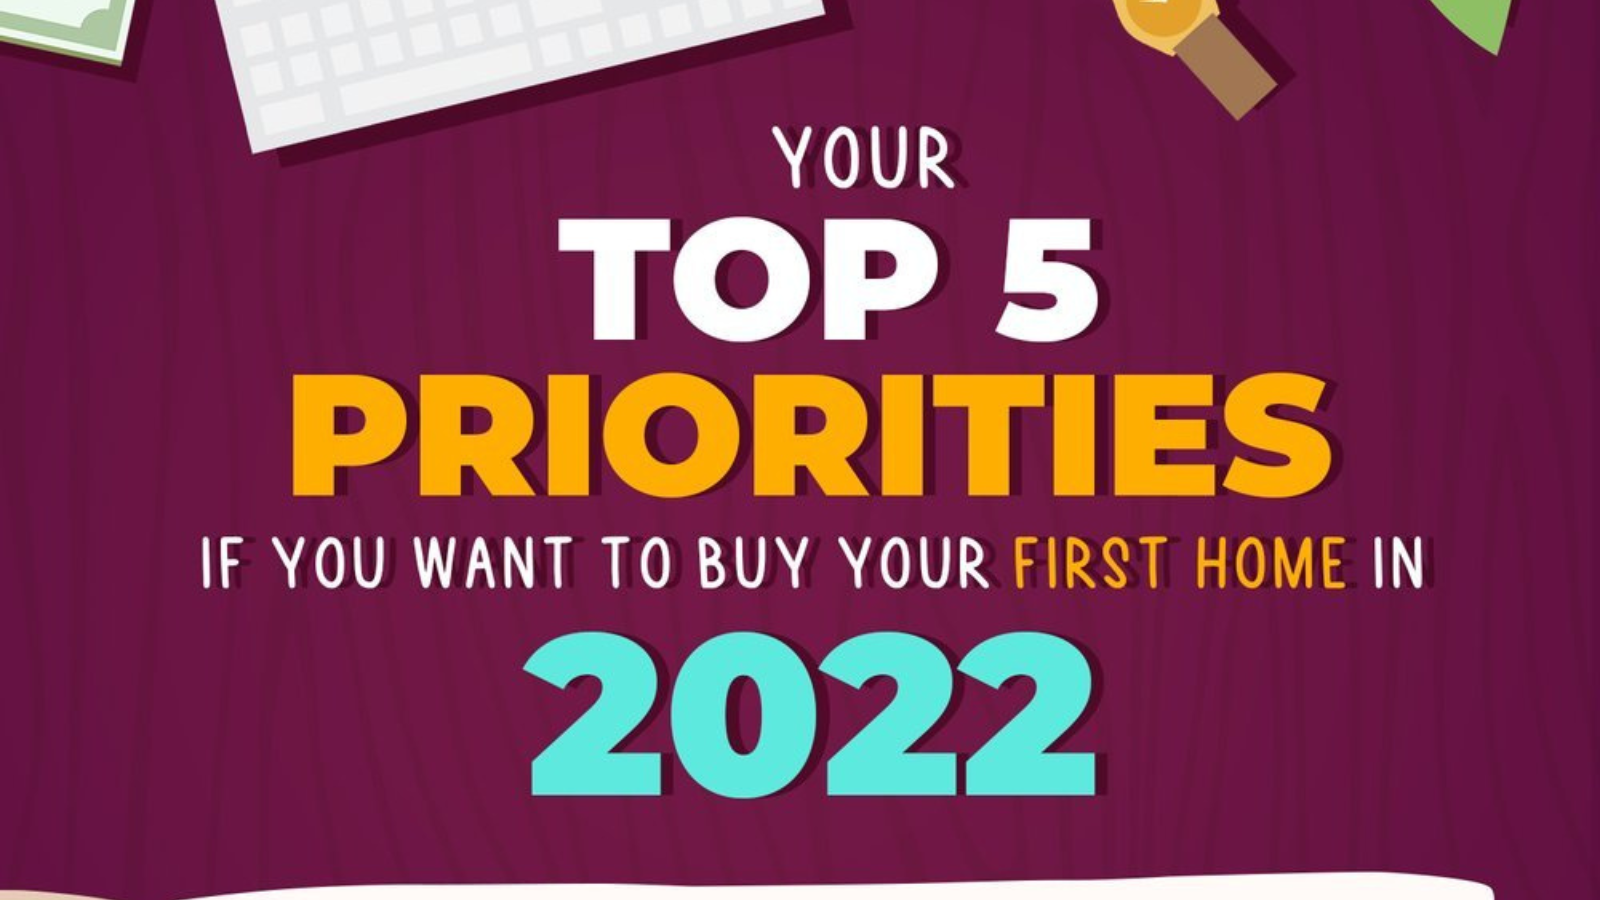 Your Top 5 Priorities If You Want To Buy Your First Home in 2022